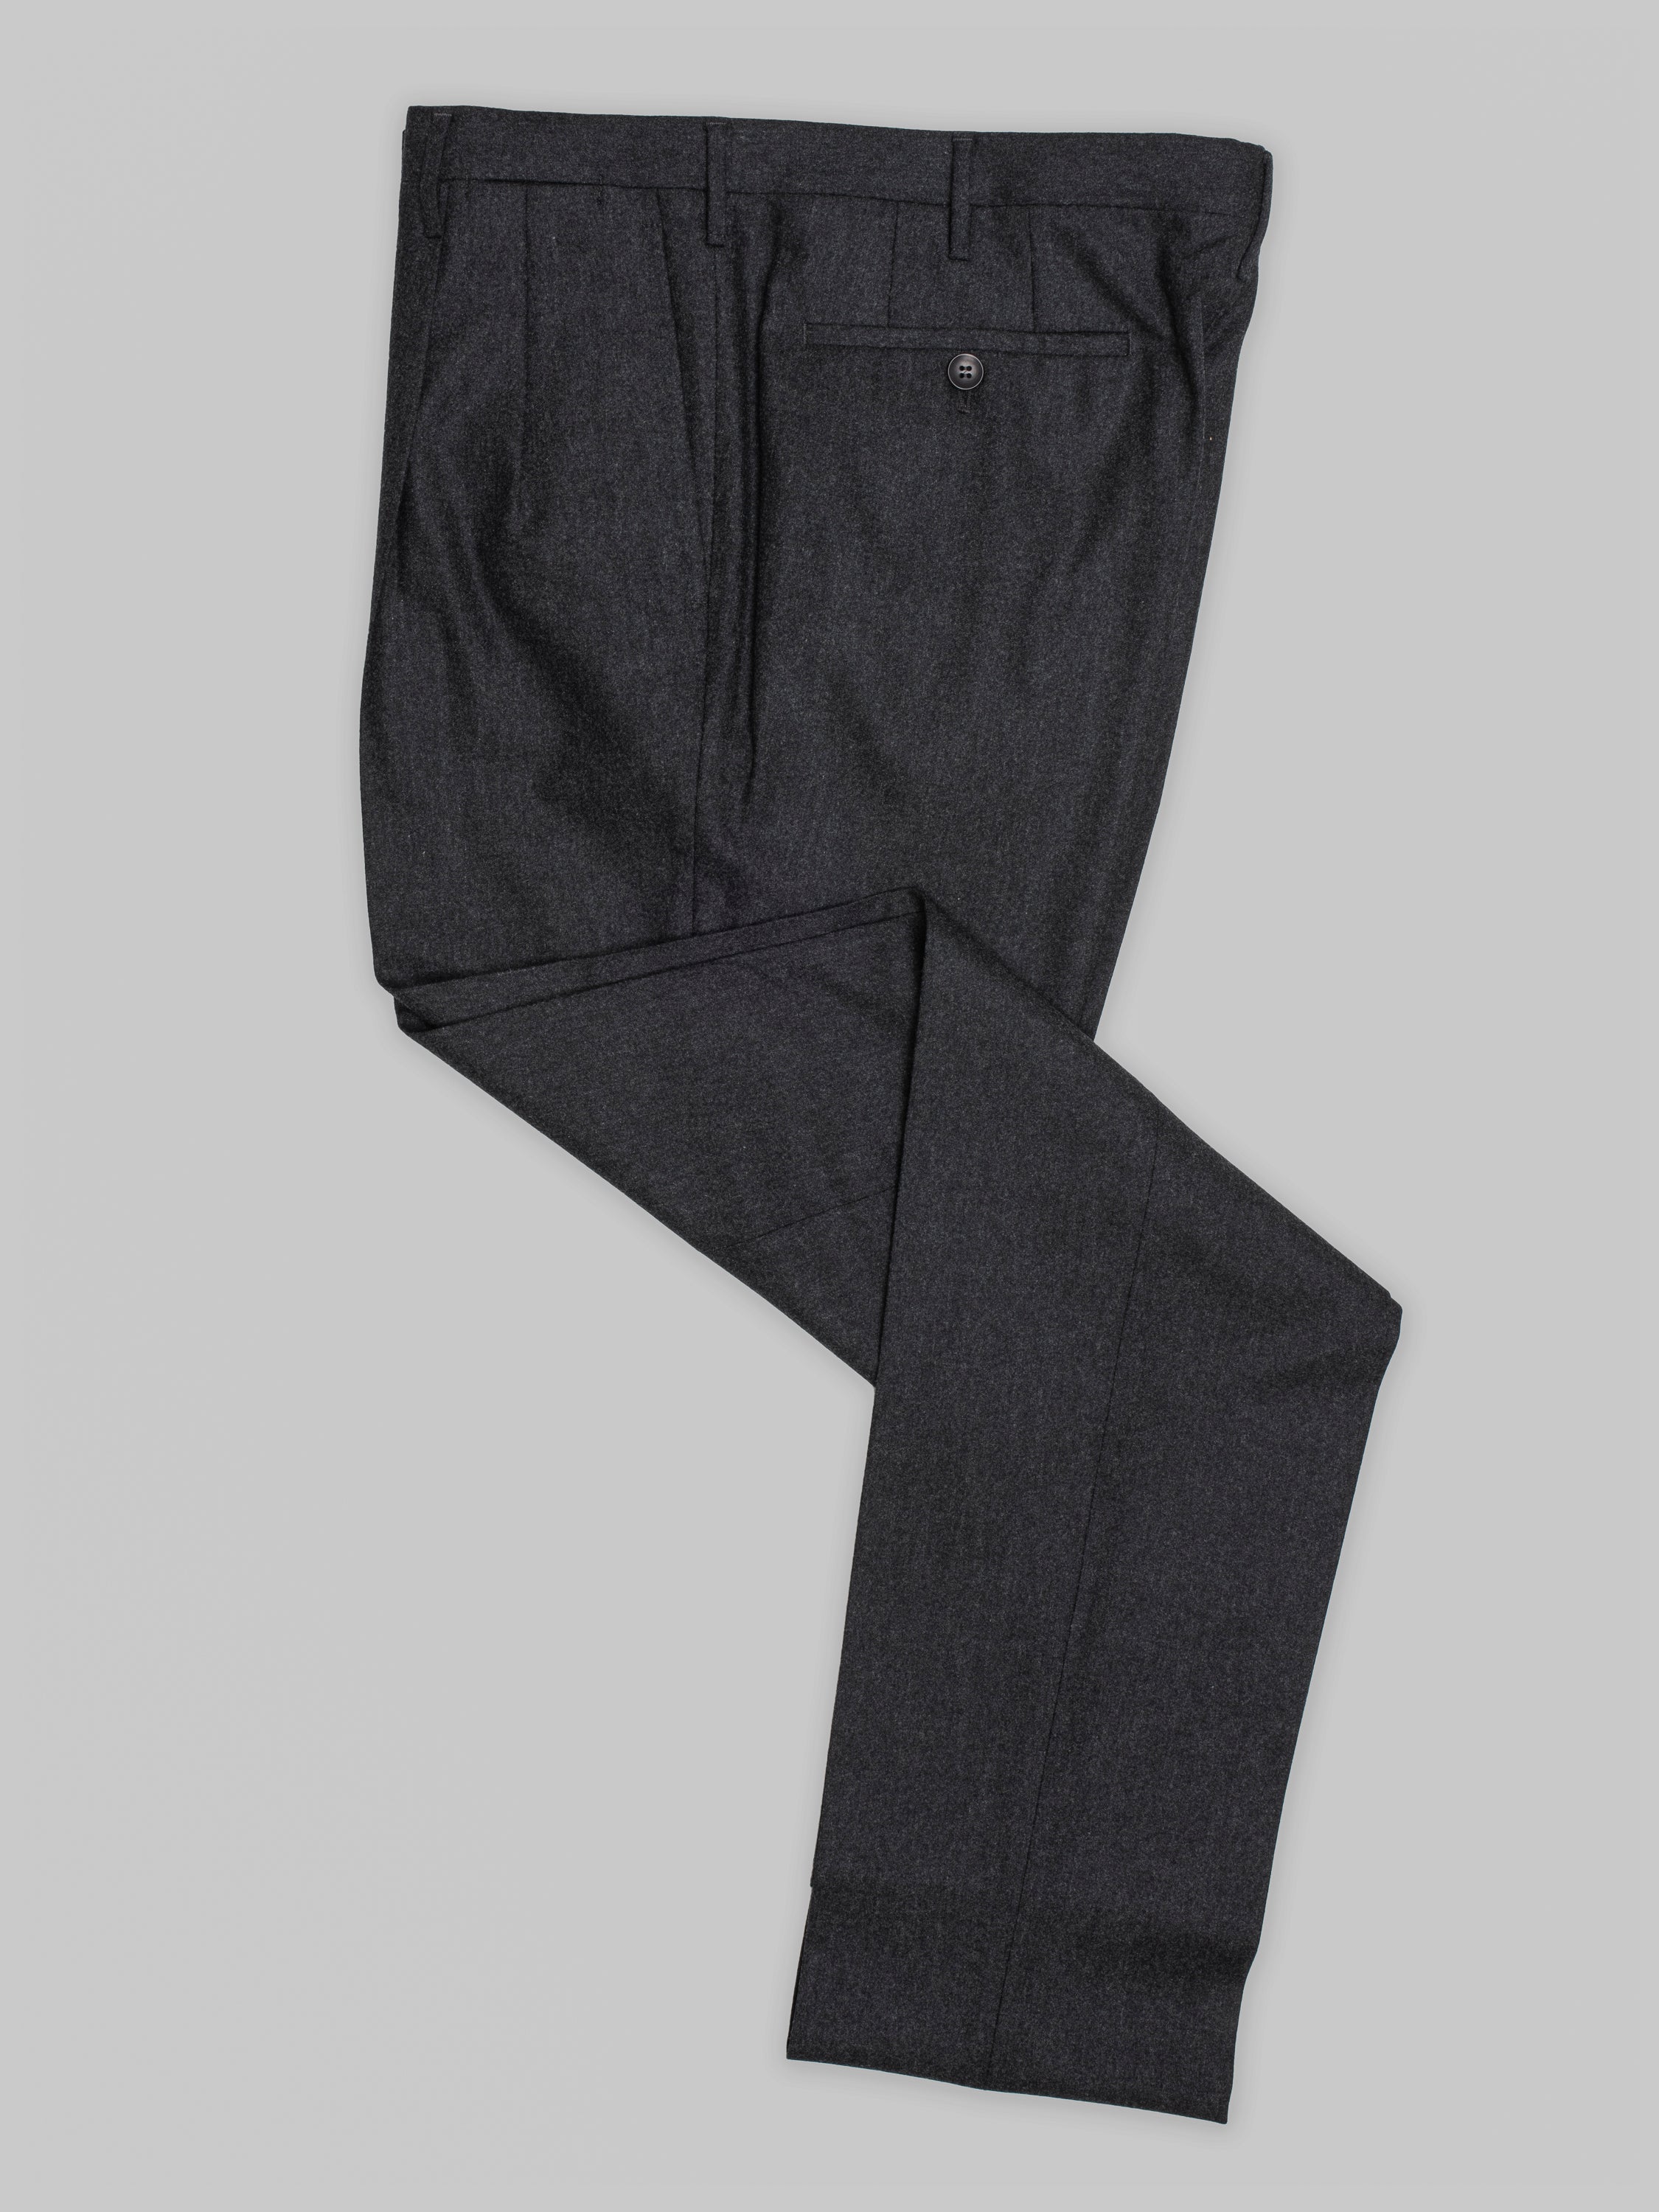 Grand Le Mar | Relaxed Elegance with Grey Flannel Drawstring Trousers.